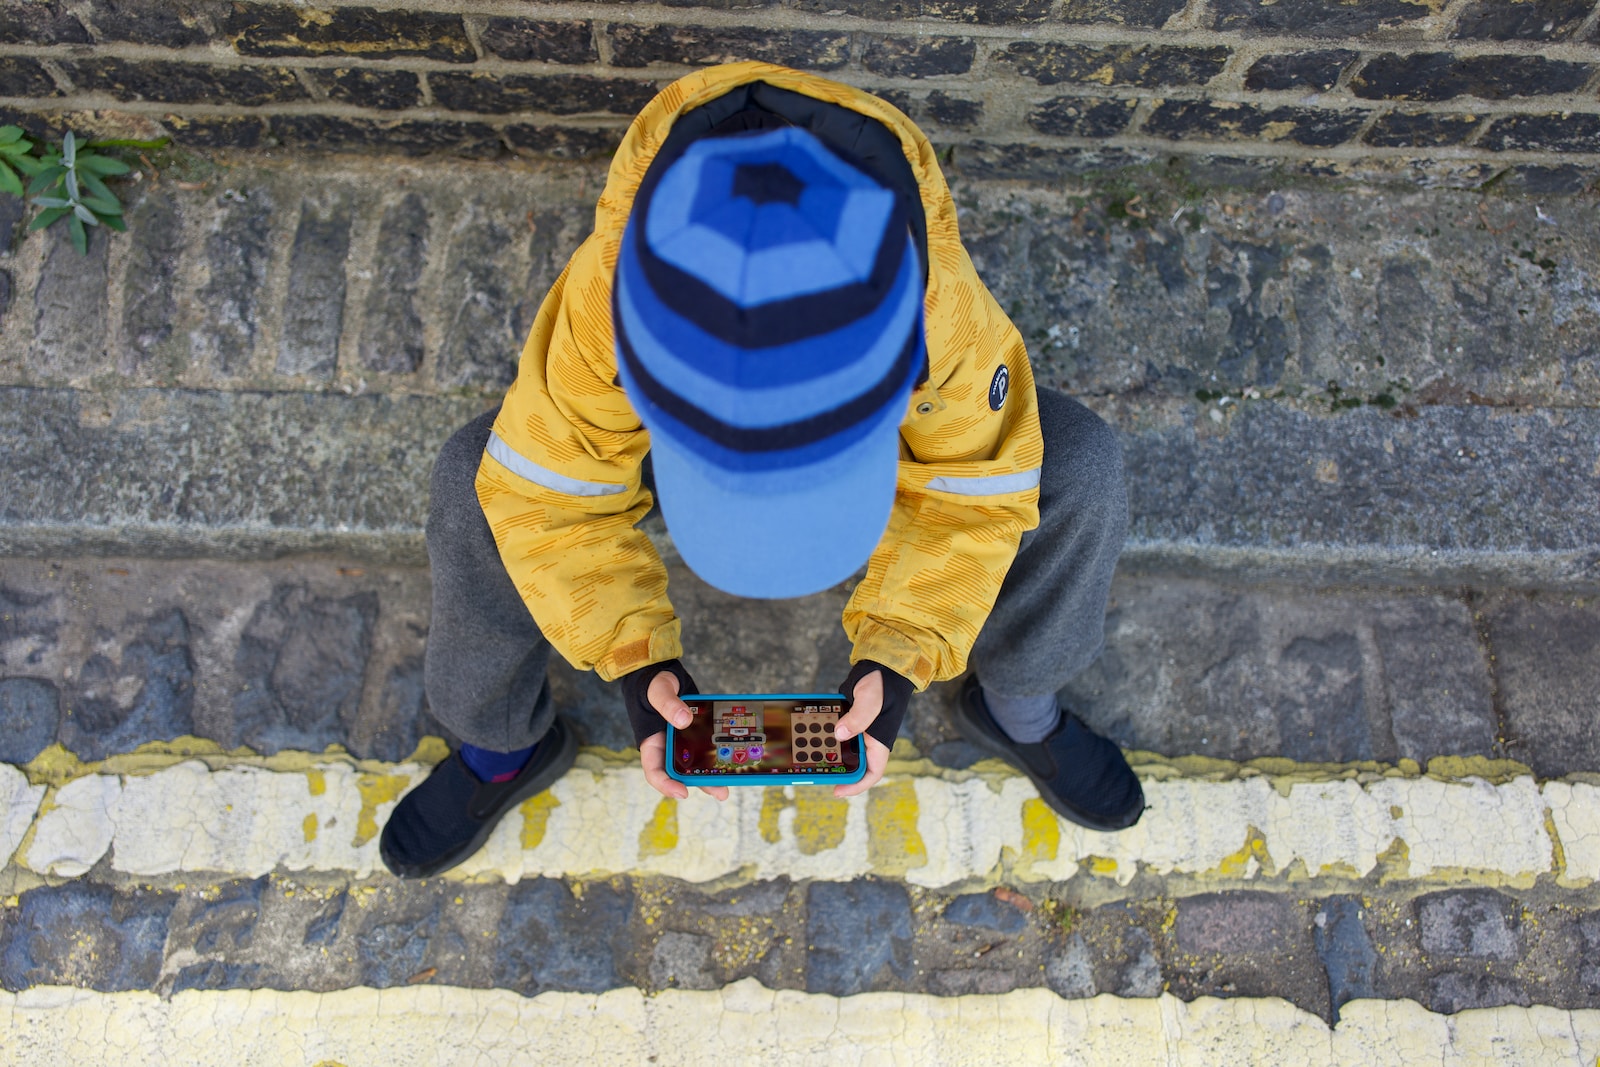 a person kneeling on the ground looking at a cell phone